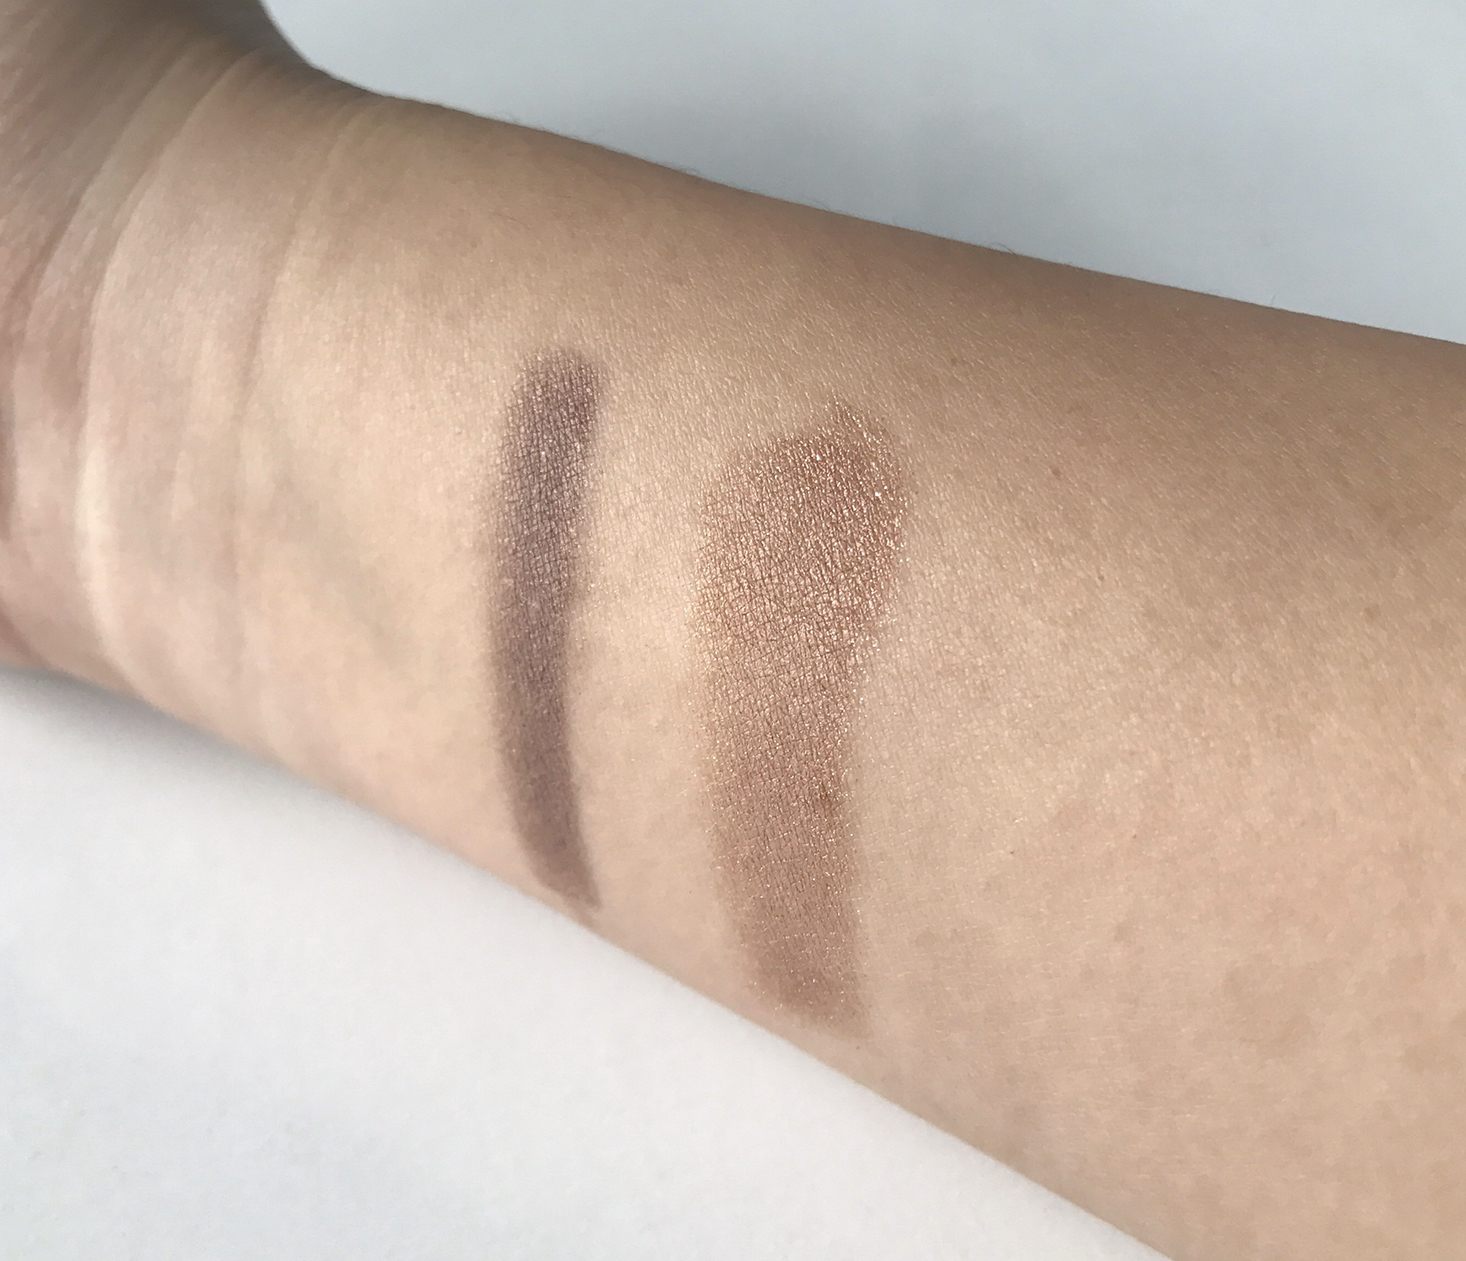 LuxePineapple-Post-January-2017-Mineral-Eyeshadows-Swatches